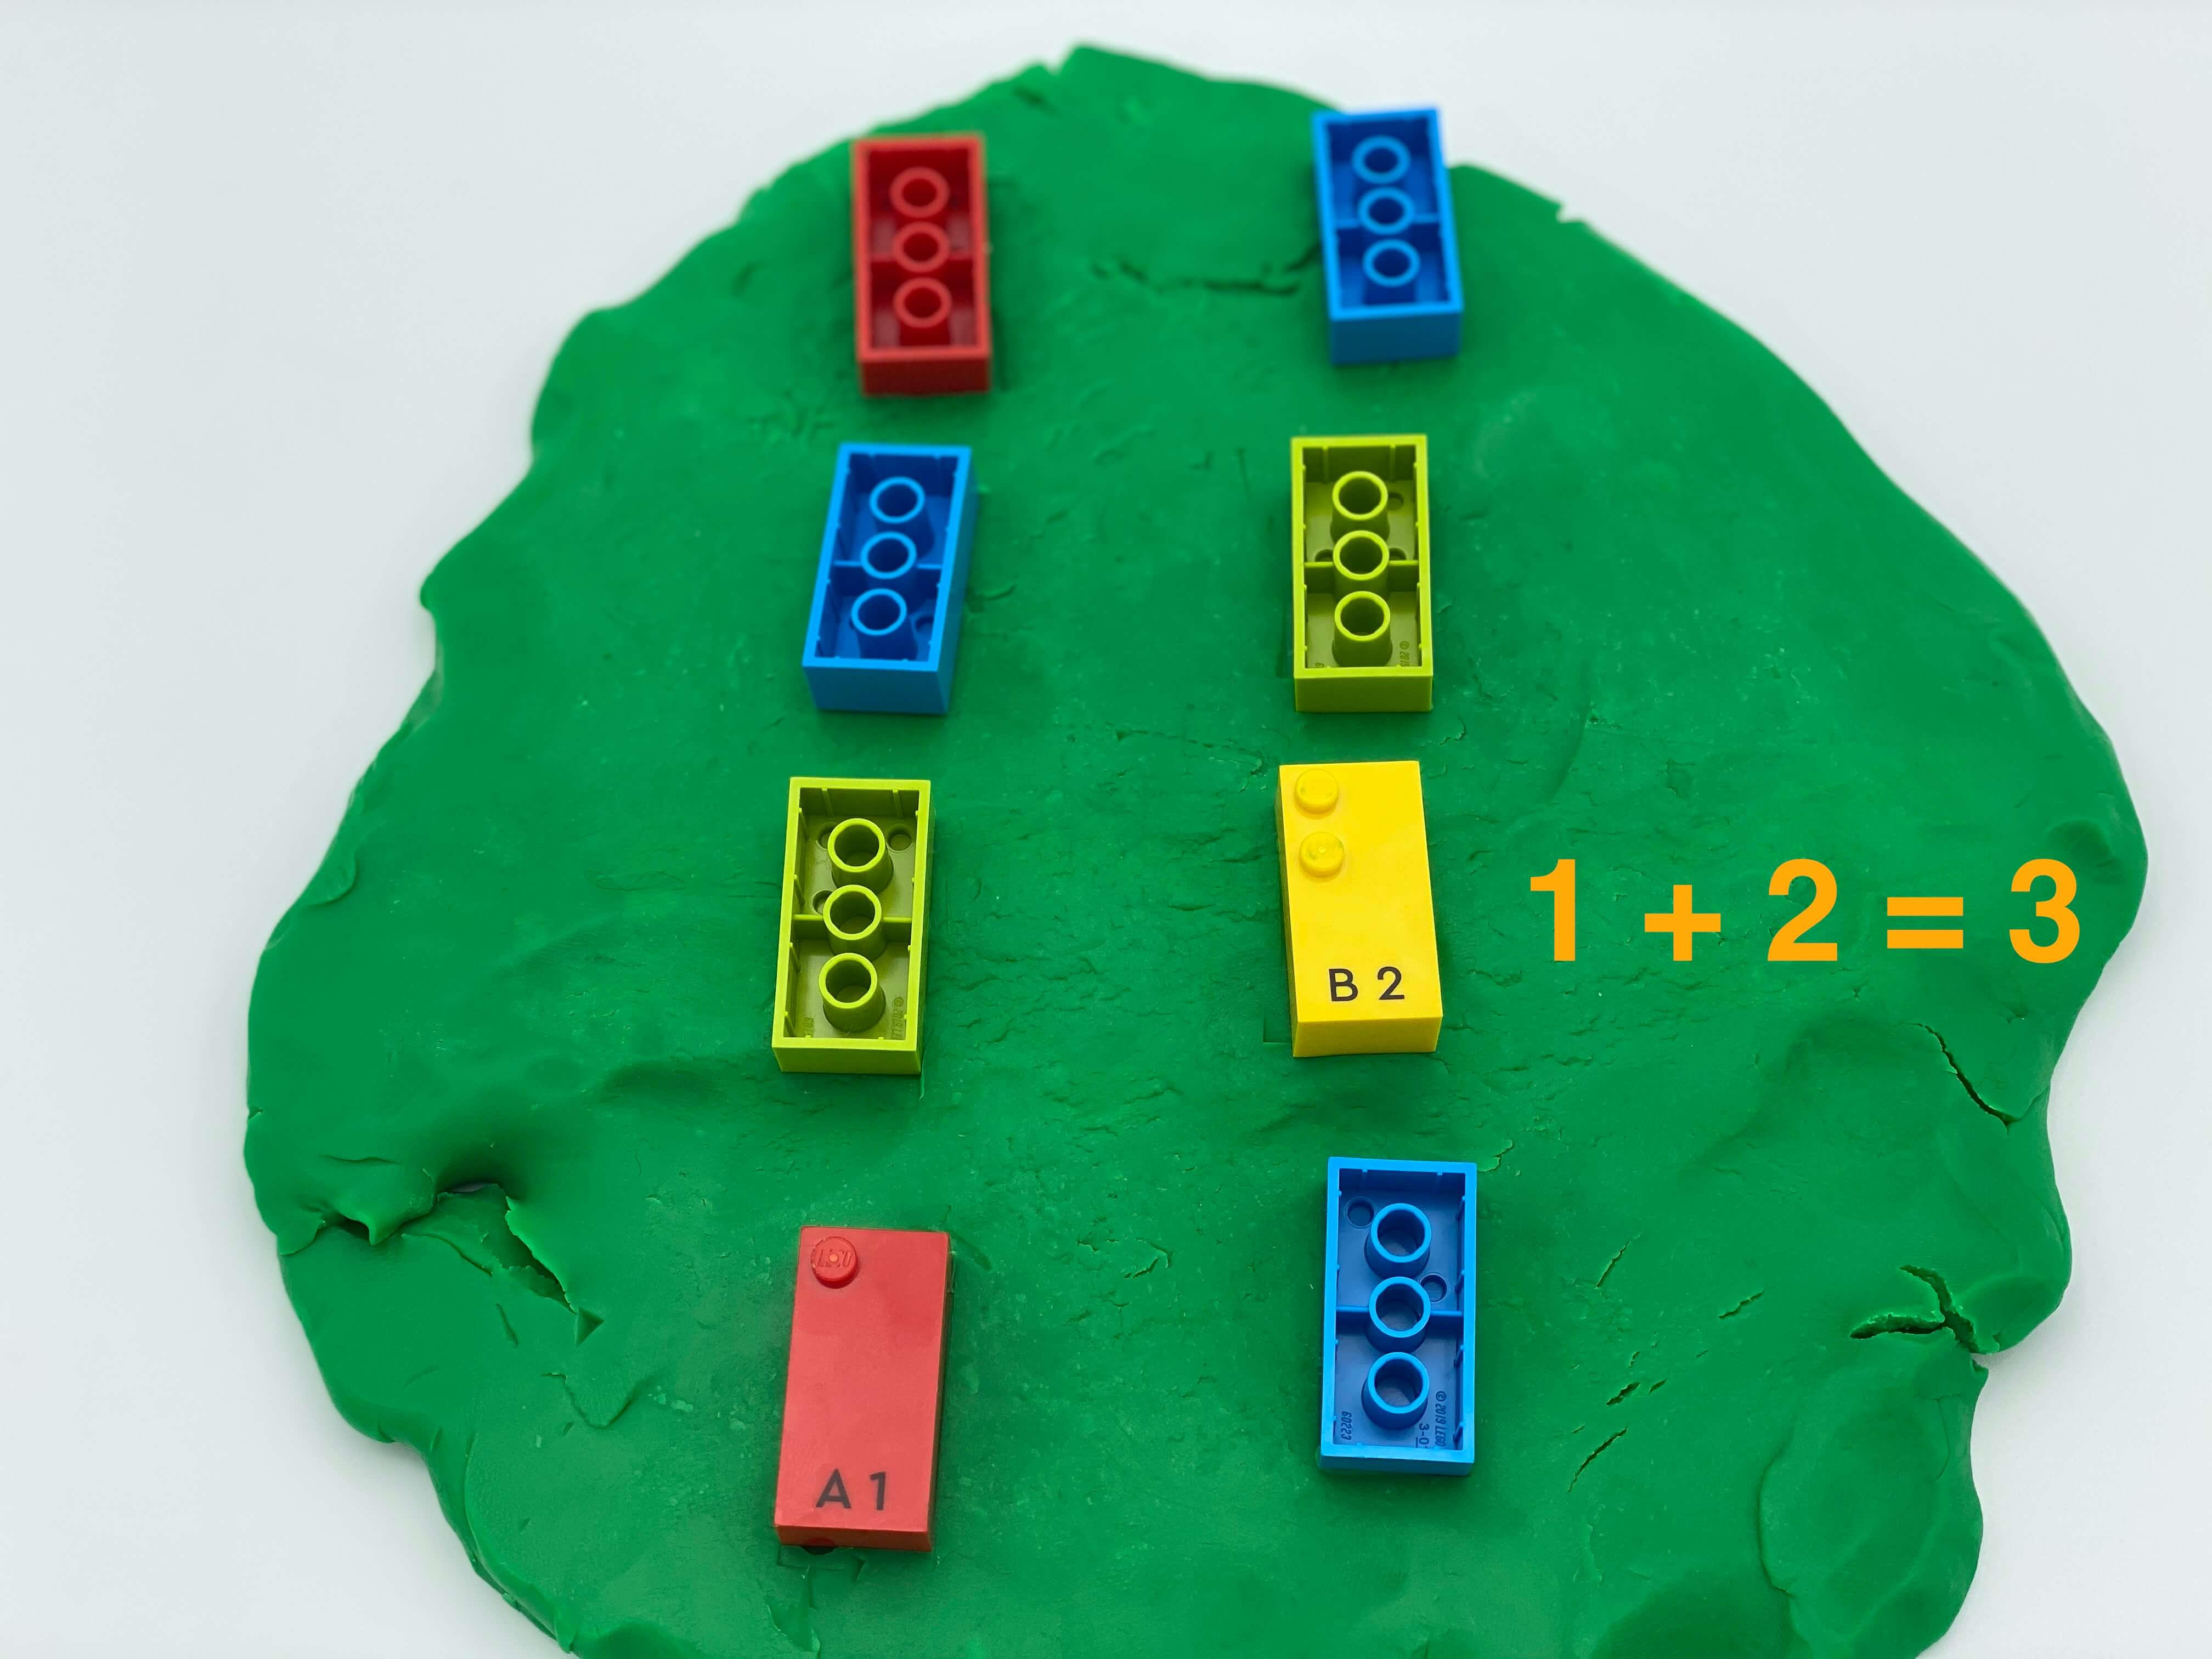 A disc of play dough with 8 bricks: 6 upside-down, 2 right-side up showing number 1 and 2. It's written 1+2=3.